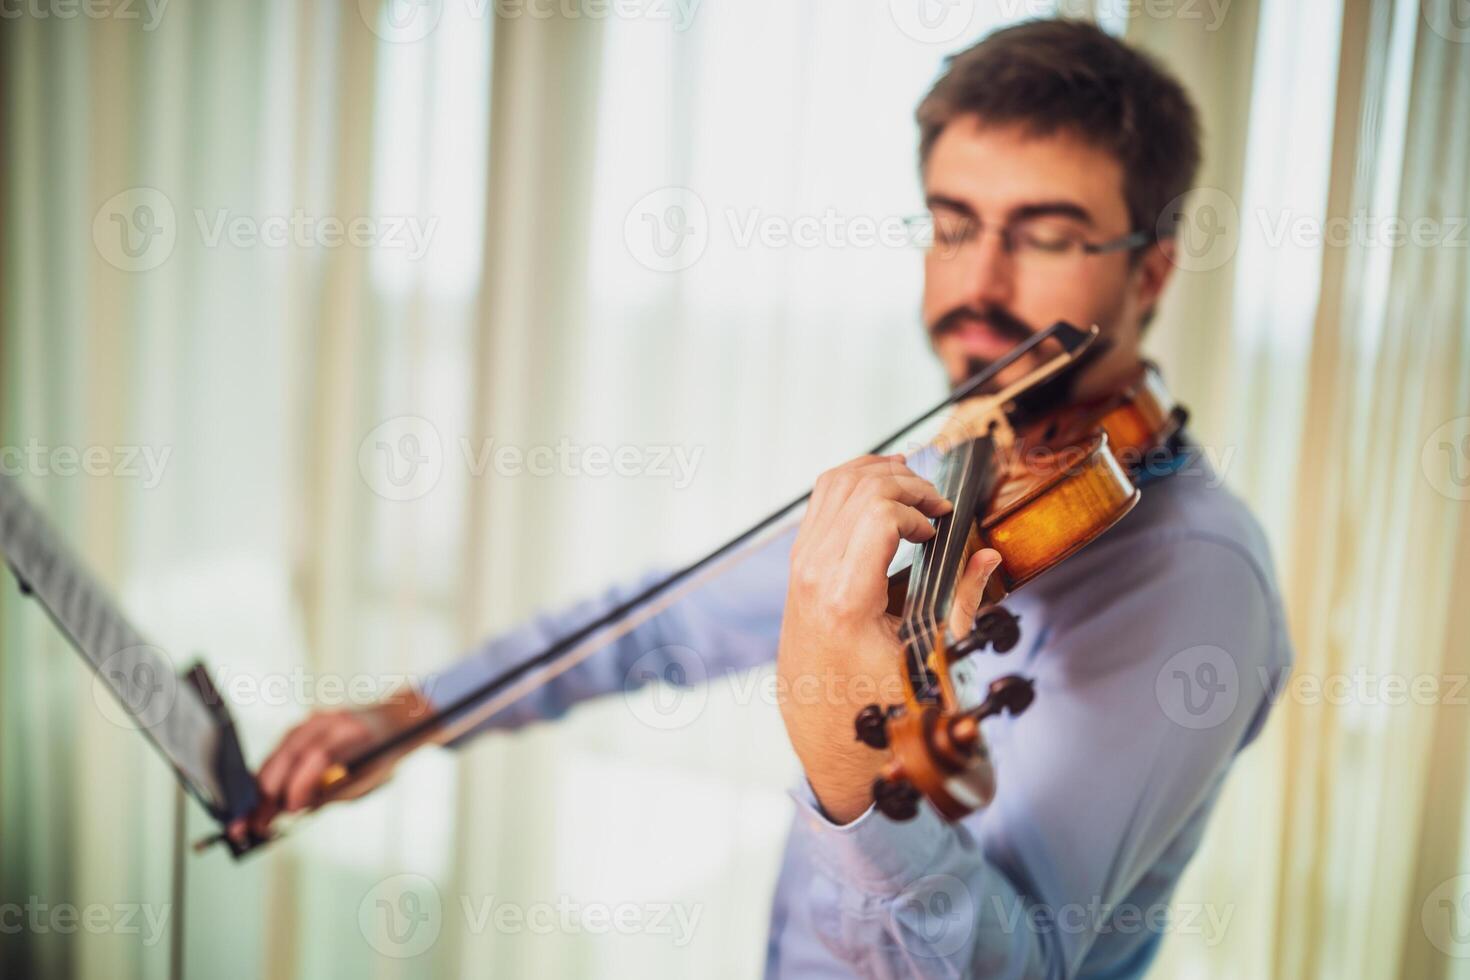 Man playing violin at home. He is cleaning his instrument. photo